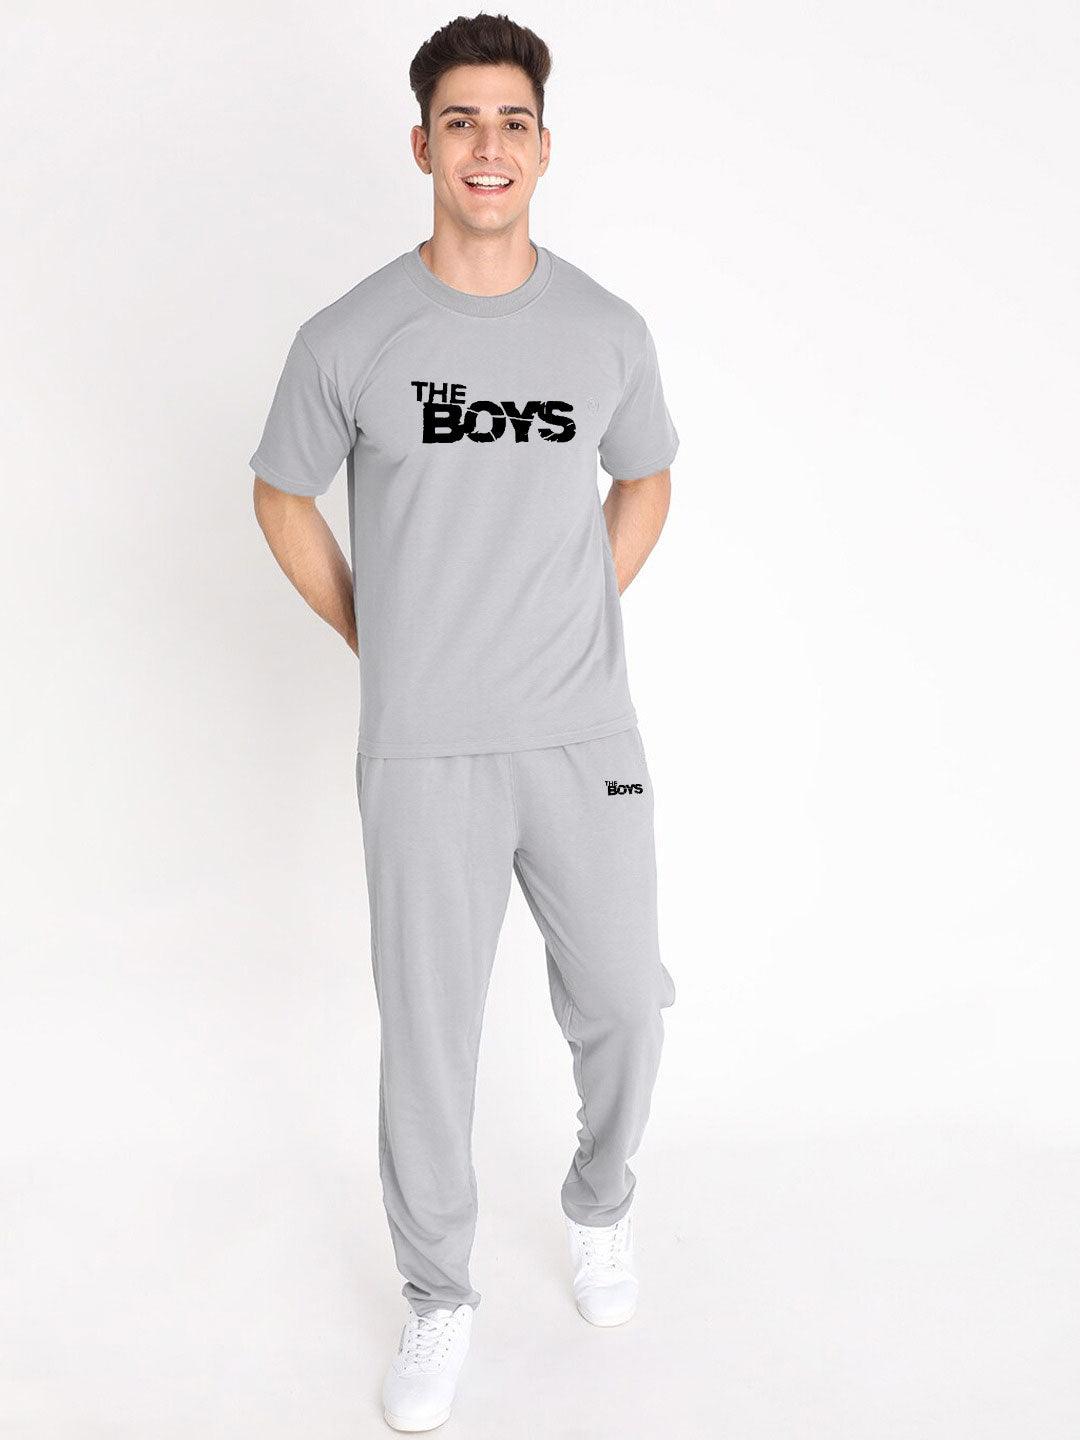 Mens Fitted Track Suits in Gray Colour - Aadhitri